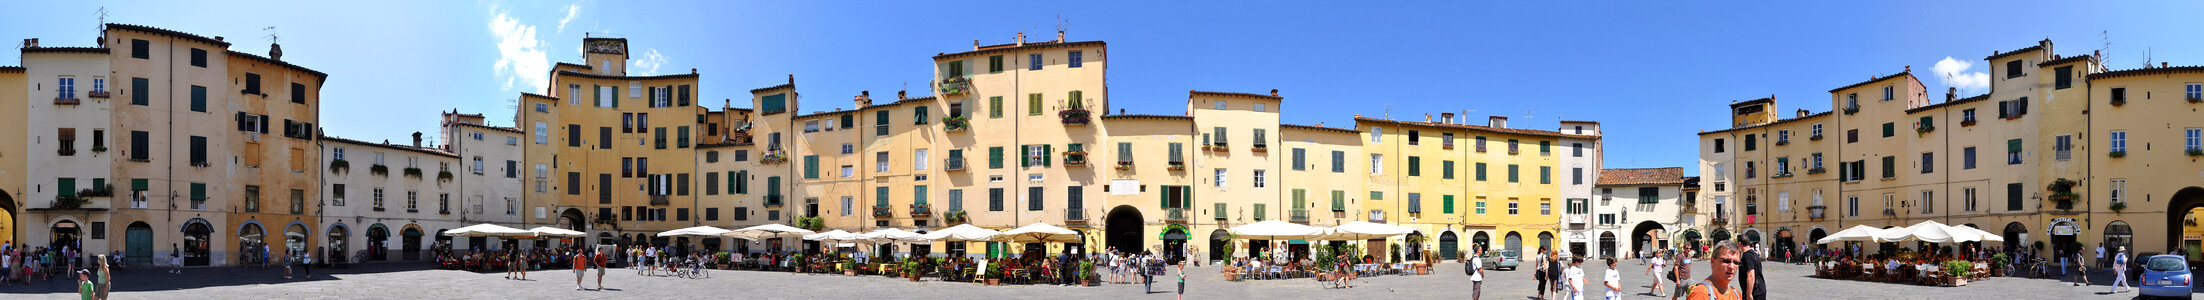 Piazza Anfiteatro in Lucca, Italy photo